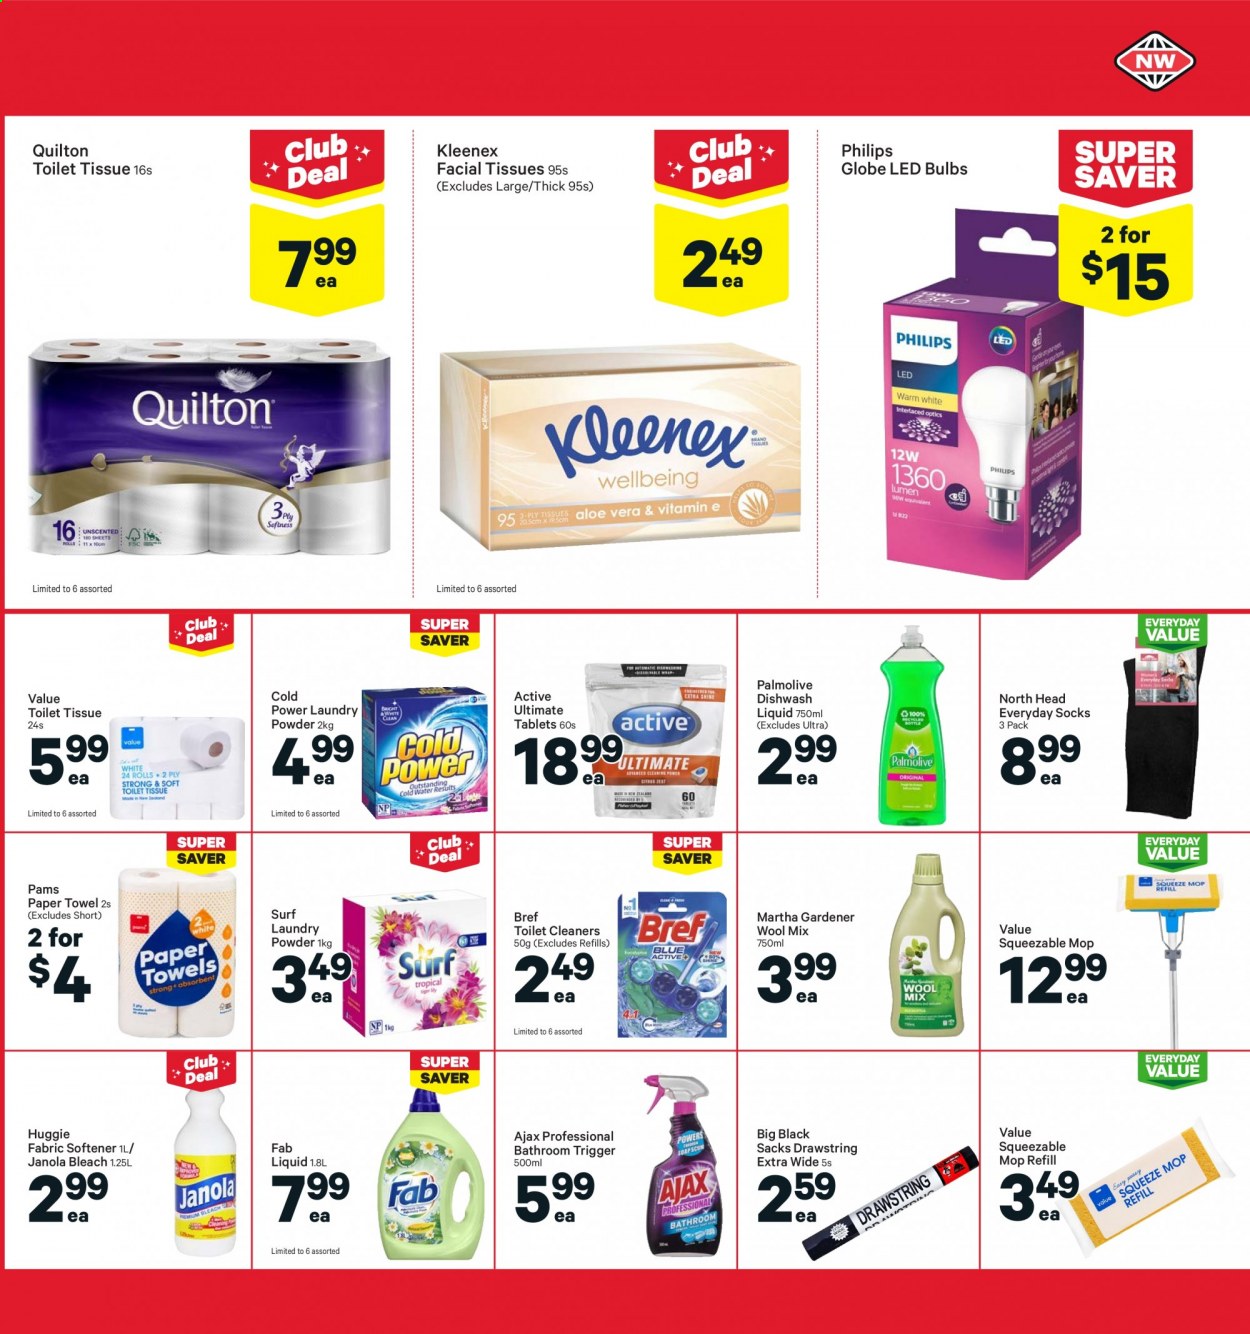 thumbnail - New World mailer - 23.08.2021 - 29.08.2021 - Sales products - Kleenex, toilet paper, Quilton, paper towels, Palmolive, facial tissues, bleach. Page 27.